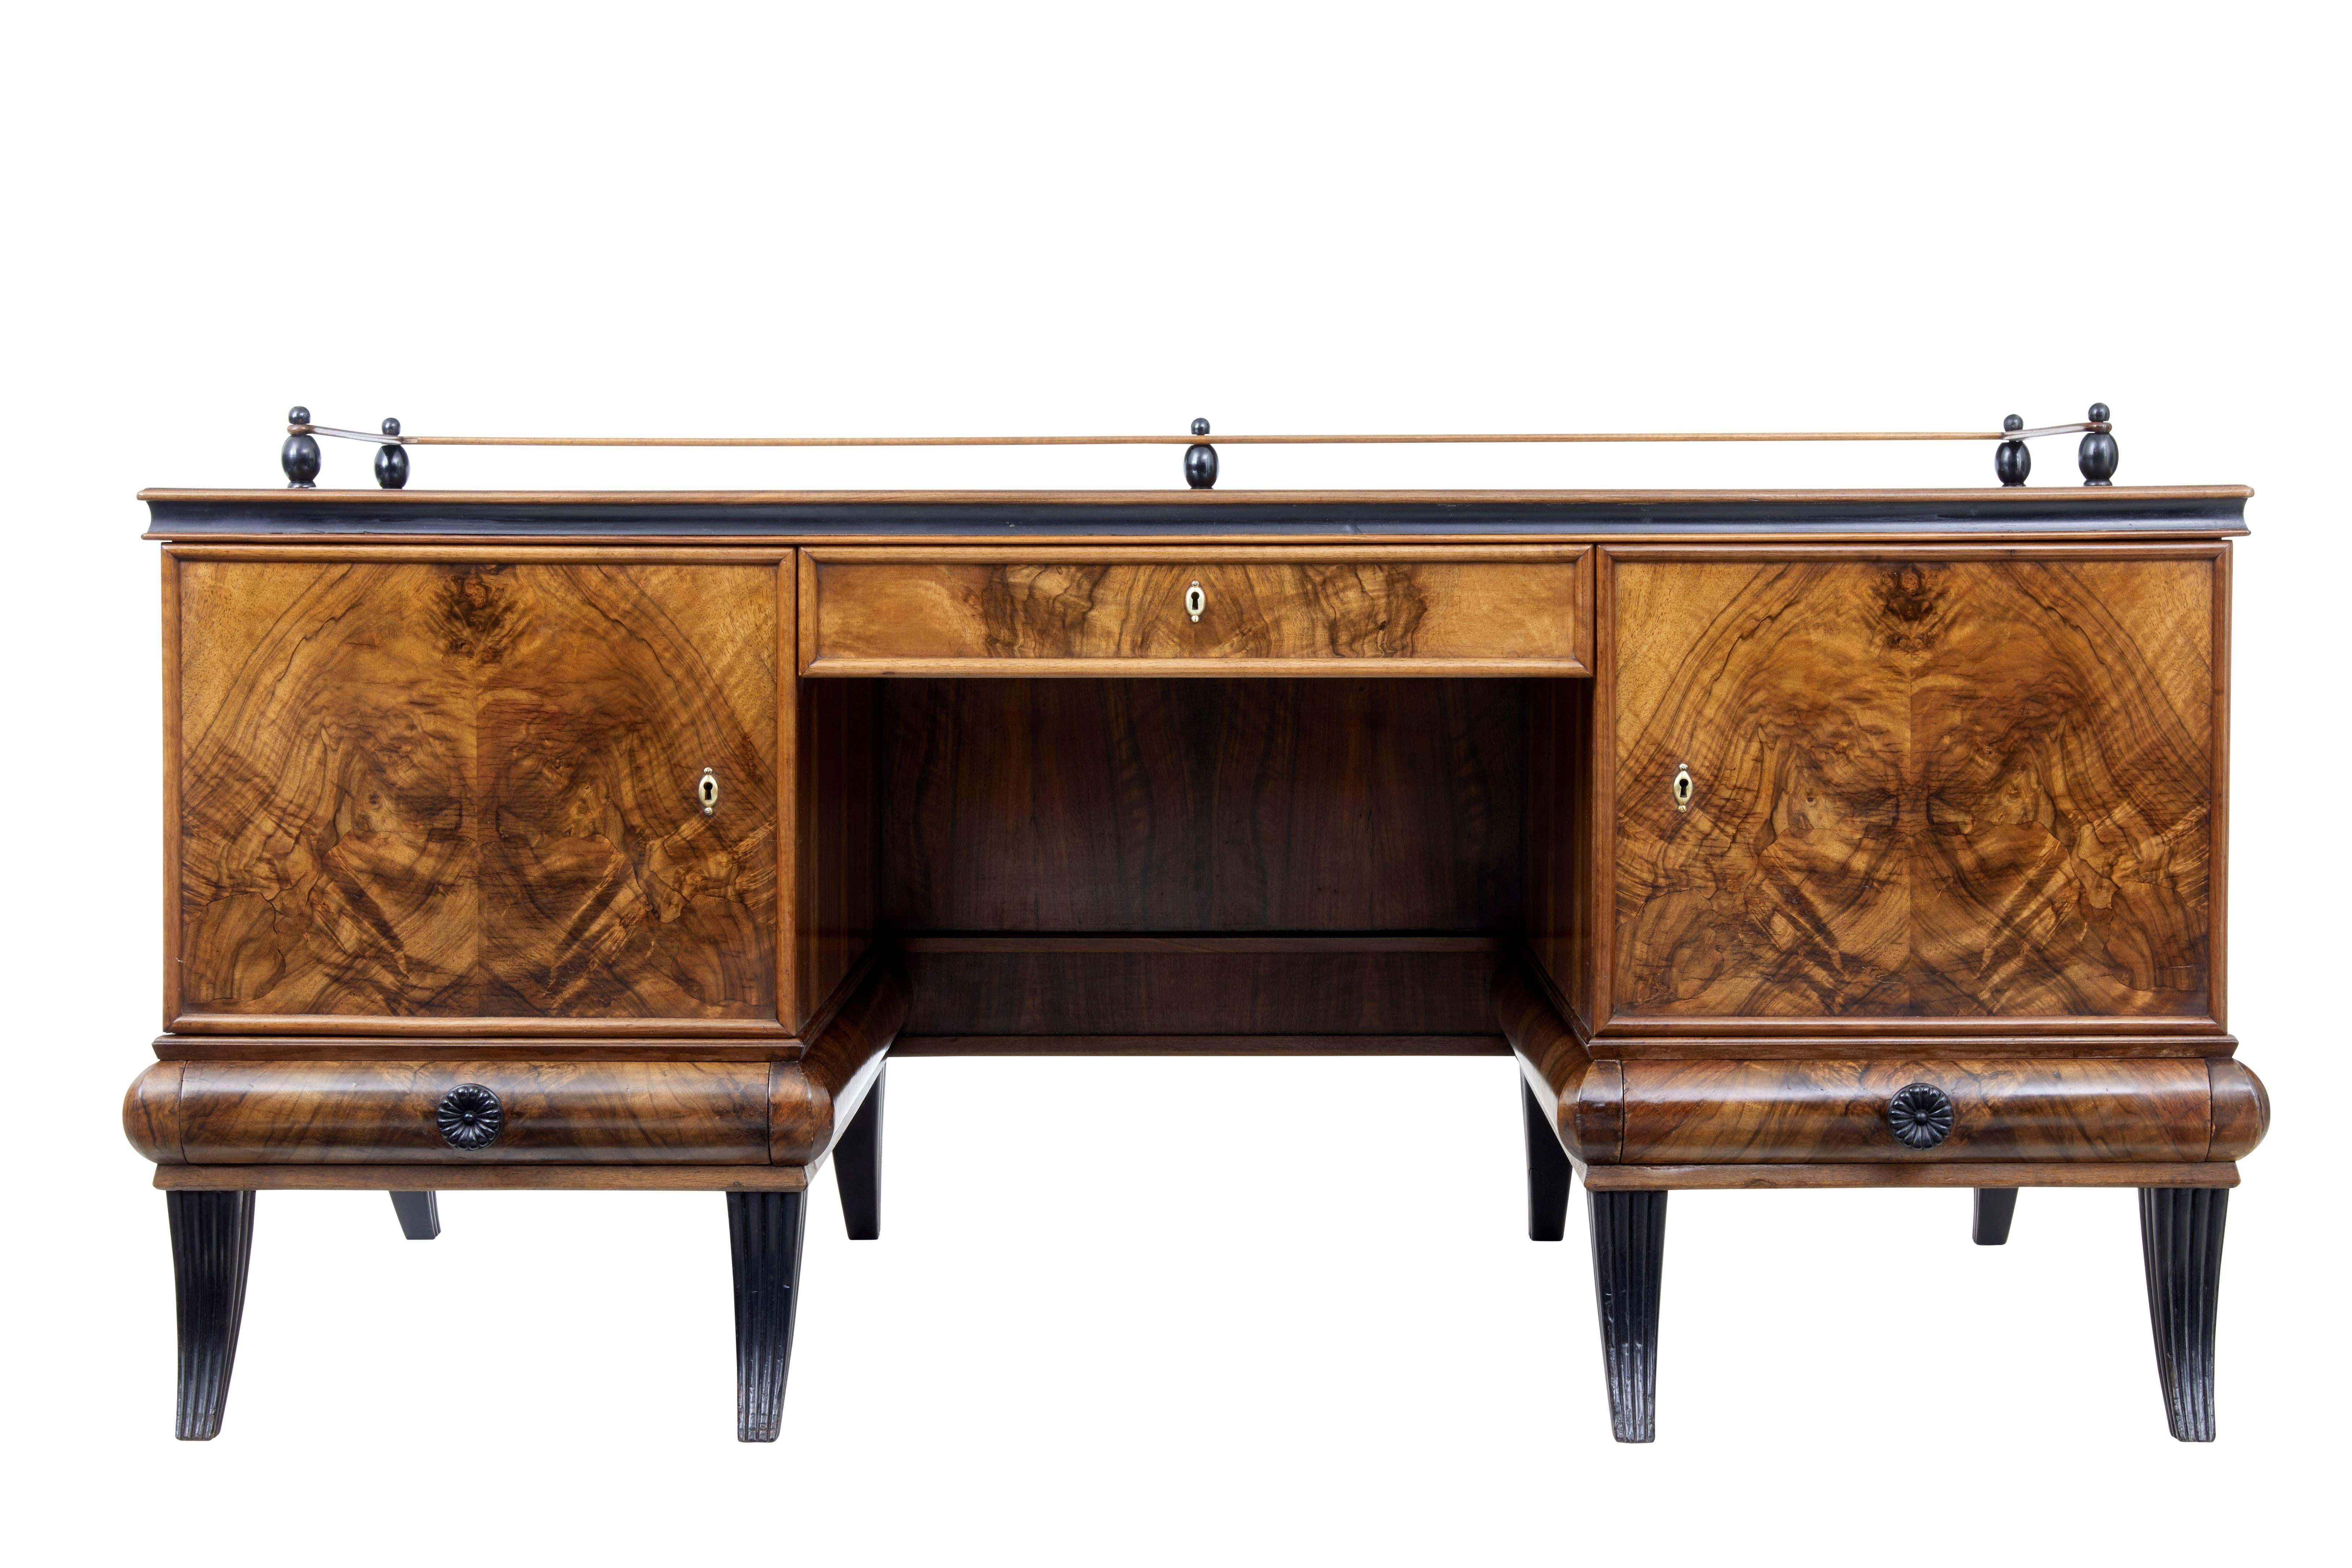 Superb quality statement desk designed for atvidaberg, circa 1930.

Large one piece desk, stunning rosewood top with decorative gallery supported by ebonized bobbins.

Single drawer above the knee hole and flanked either side by a single door